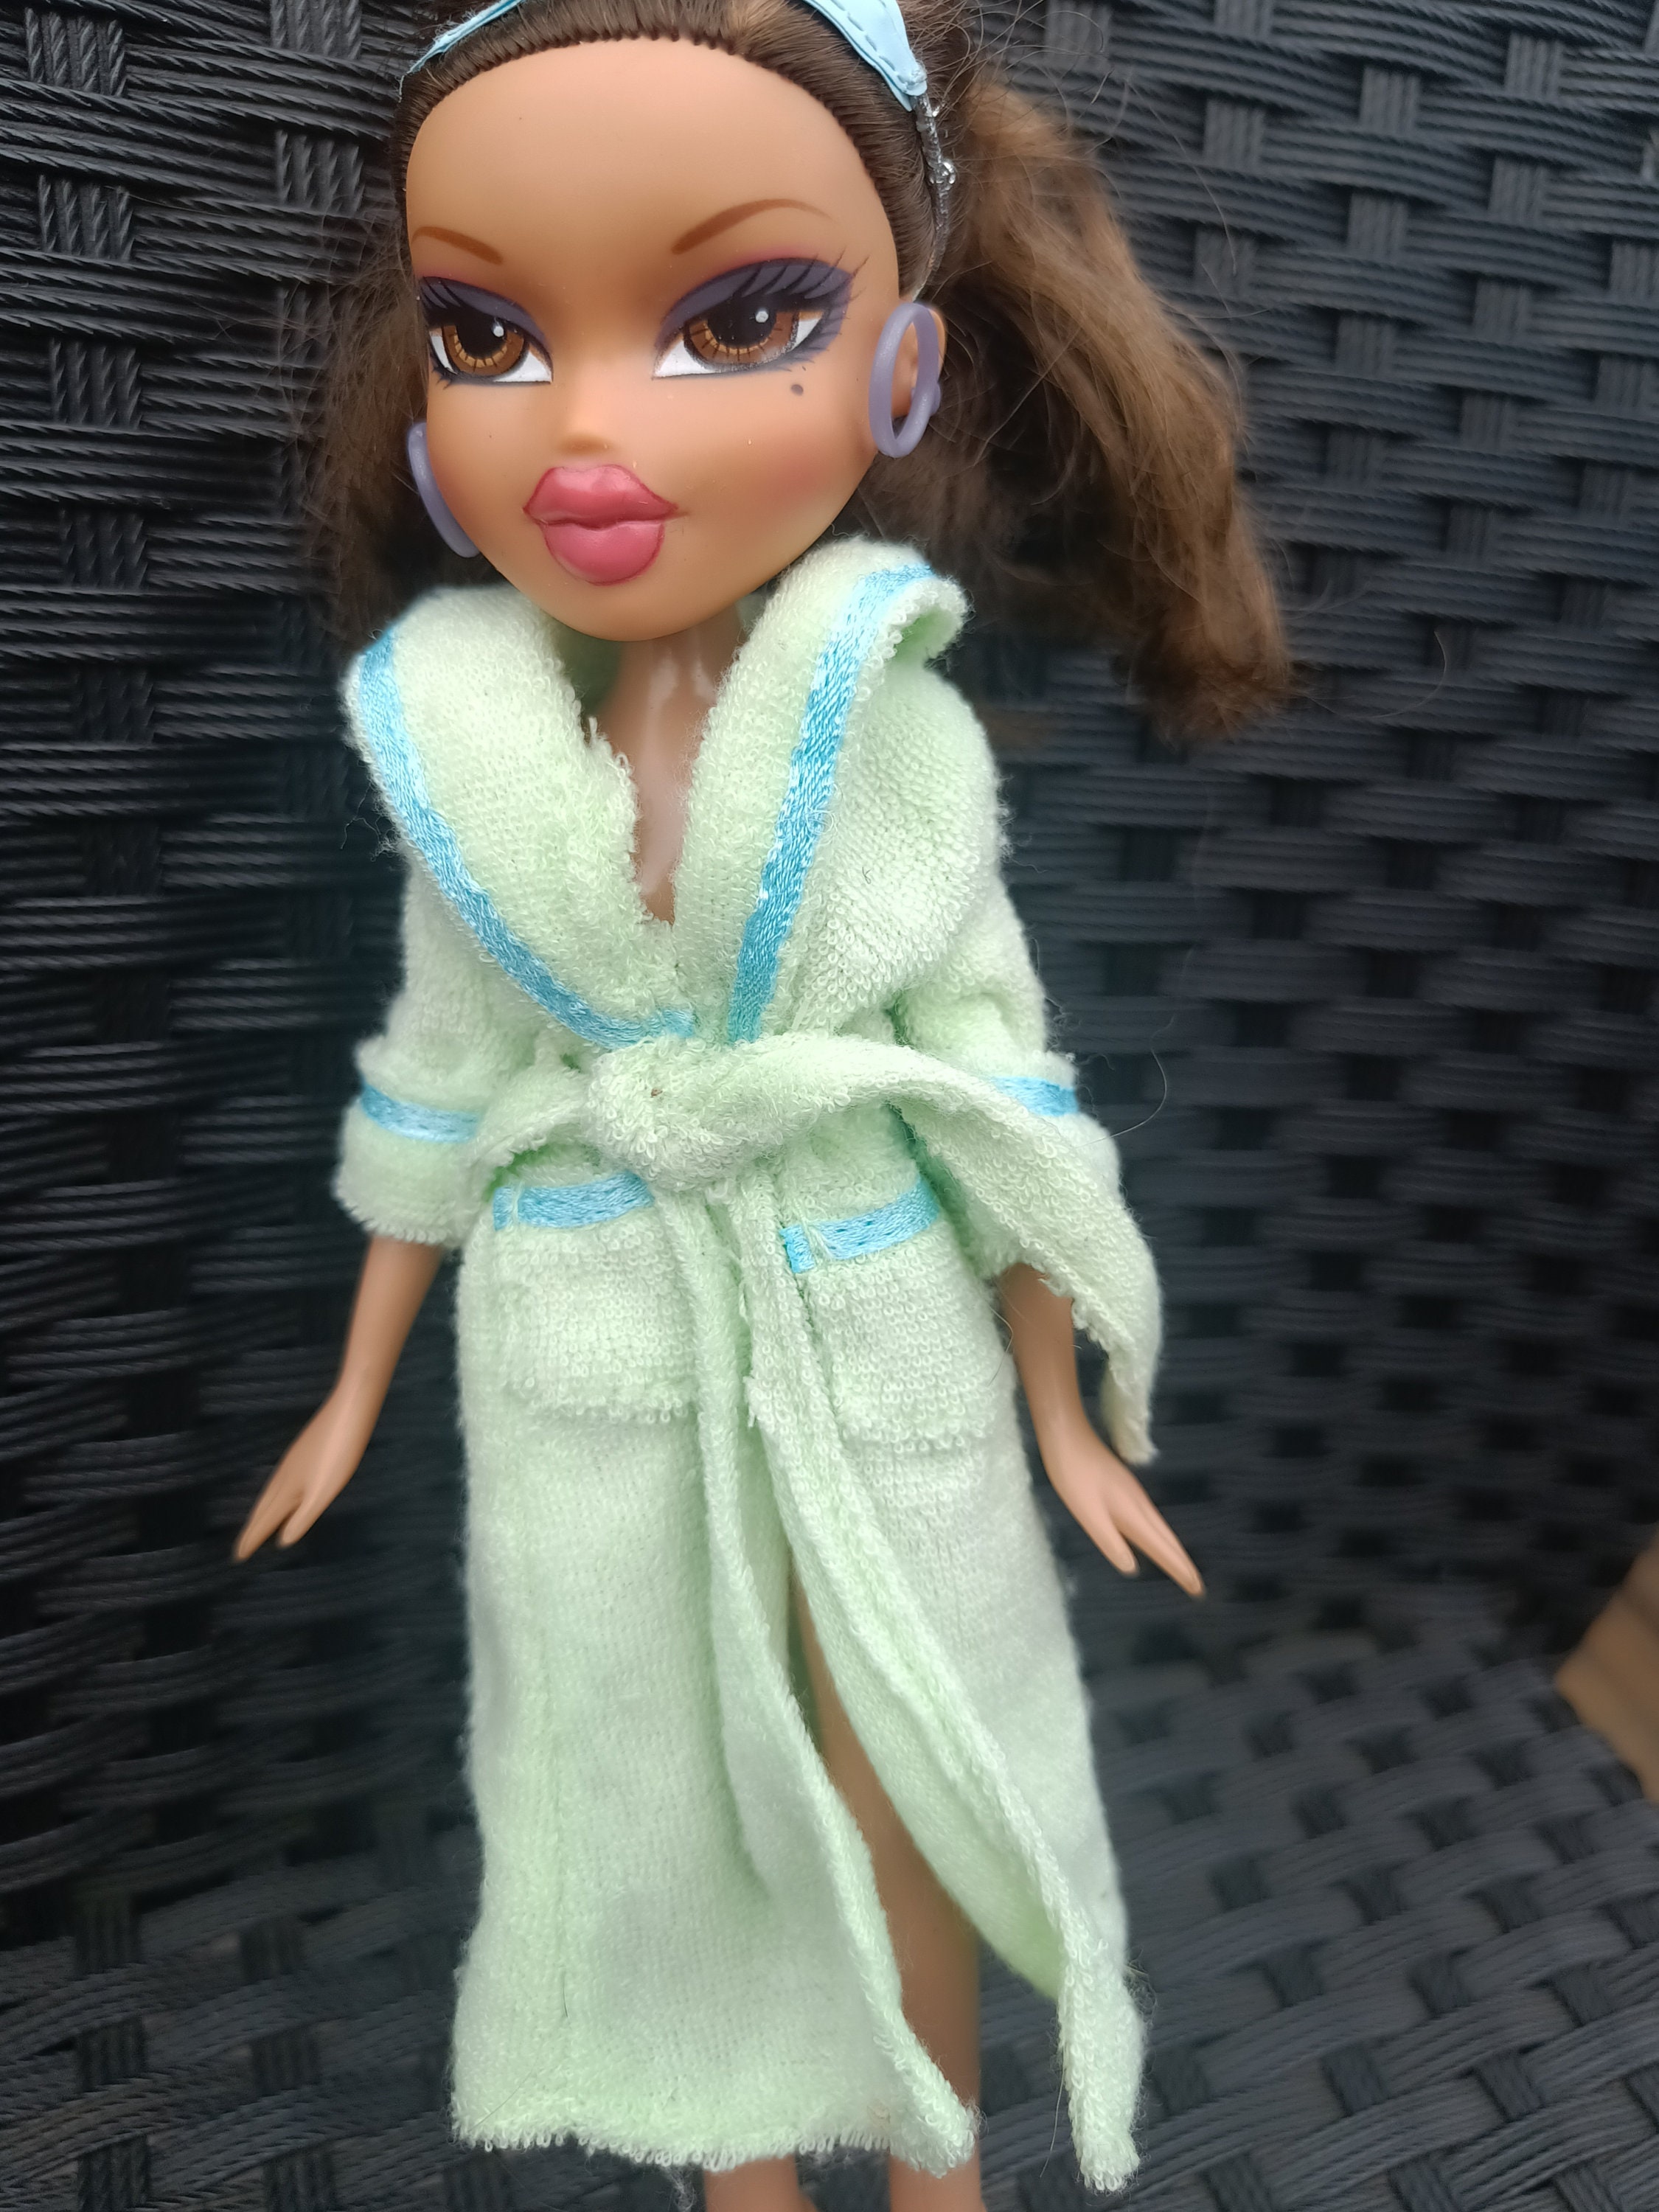 Bratz Dolls Authentic MGA Collectible or for Repaint or Other Projects -   Ireland